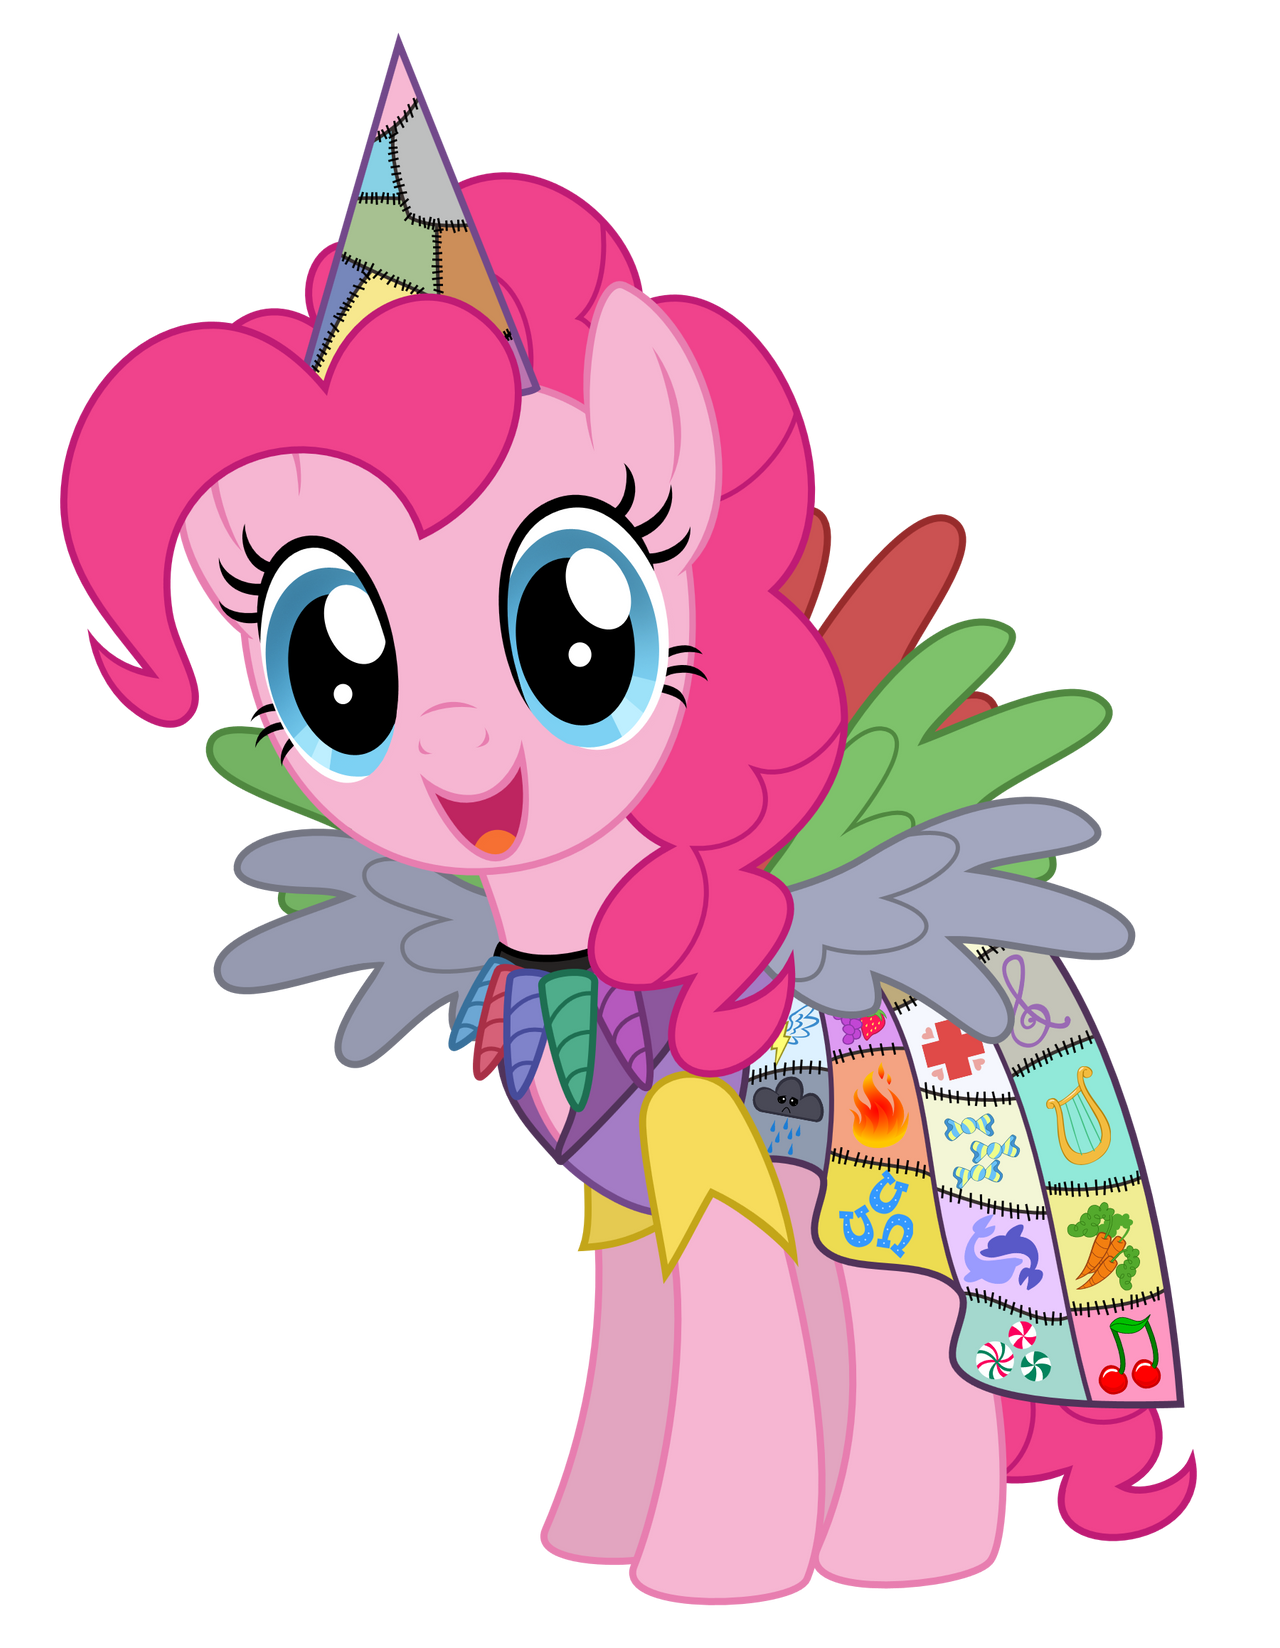 Let's Party, Pinkie Pie!